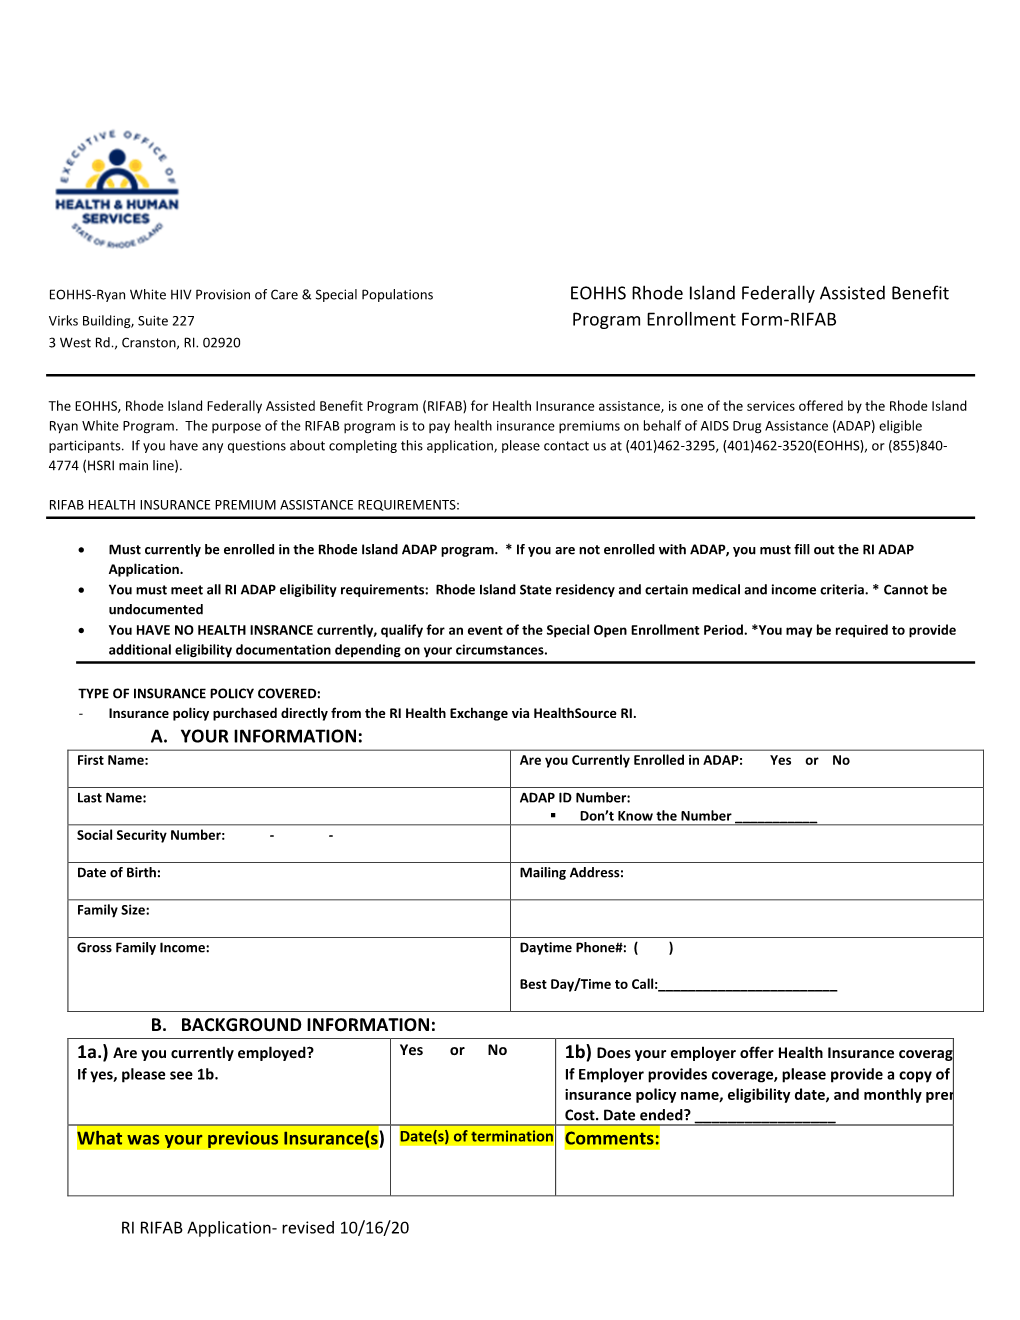 EOHHS Rhode Island Federally Assisted Benefit Program Enrollment Form-RIFAB A. YOUR INFORMATION